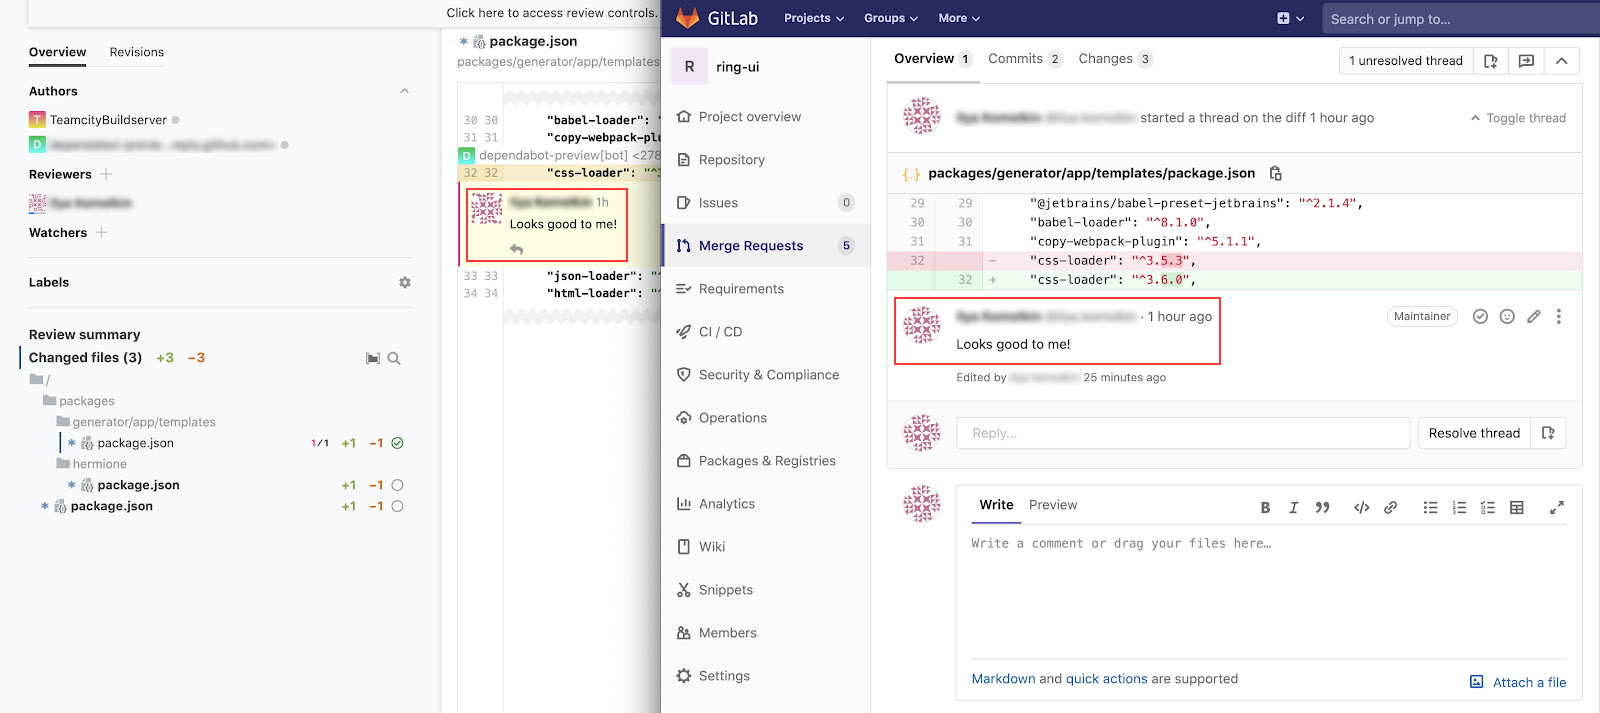 Comment synchronization with GitLab